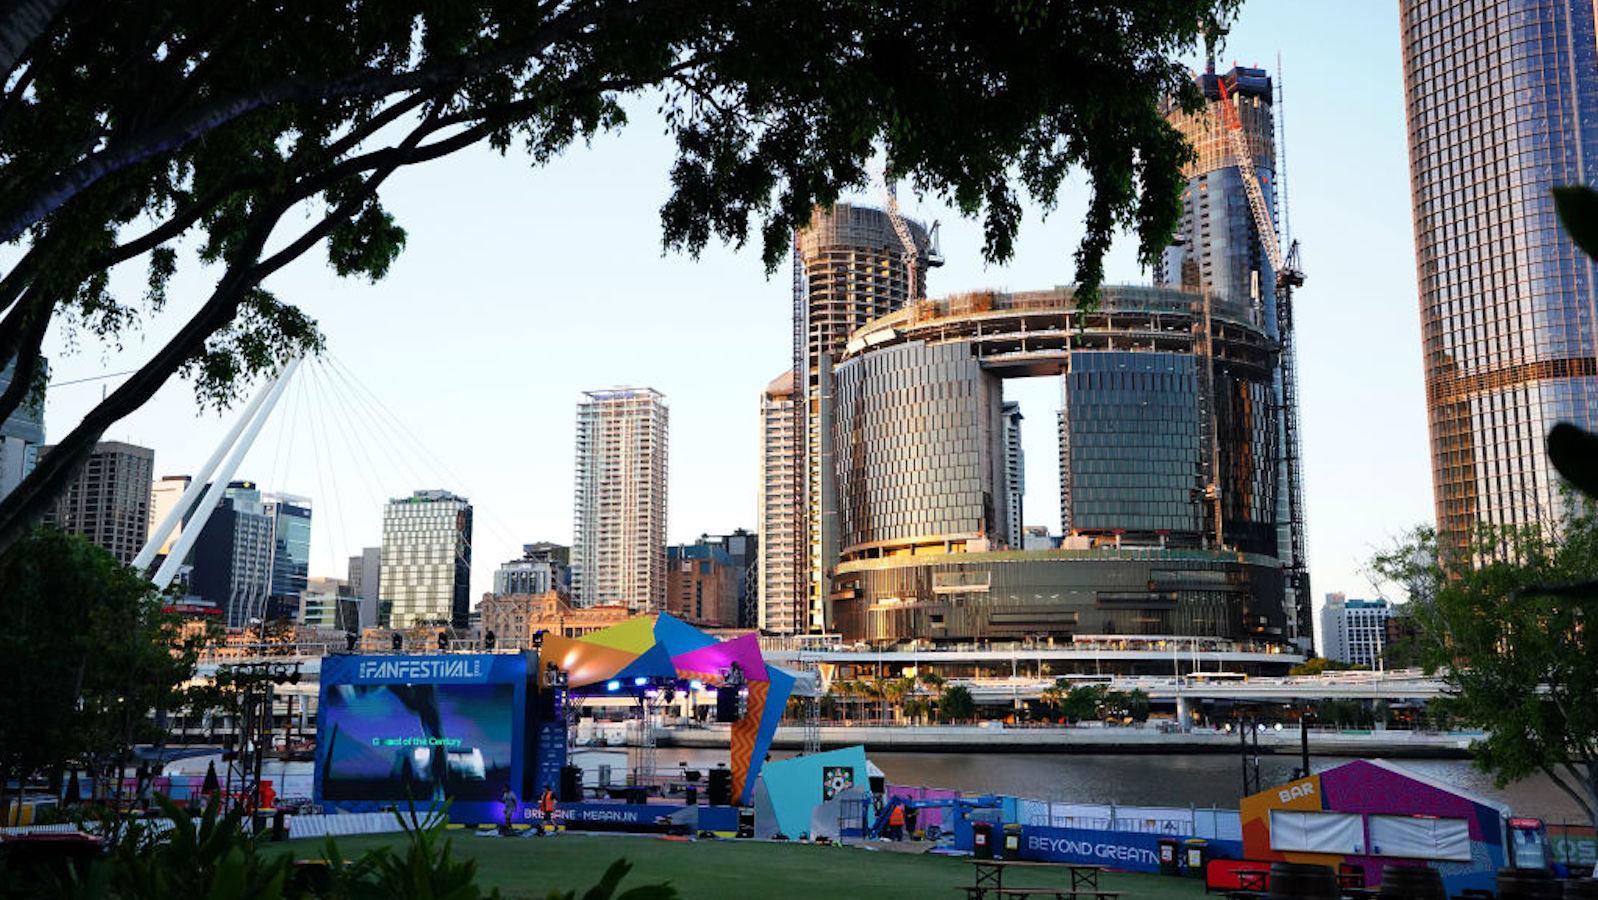 A general view of the fanfestival in Brisbane, Australia ahead of the FIFA Women's World Cup 2023 which begins on the 20th July jointly hosted by Australia and New Zealand.